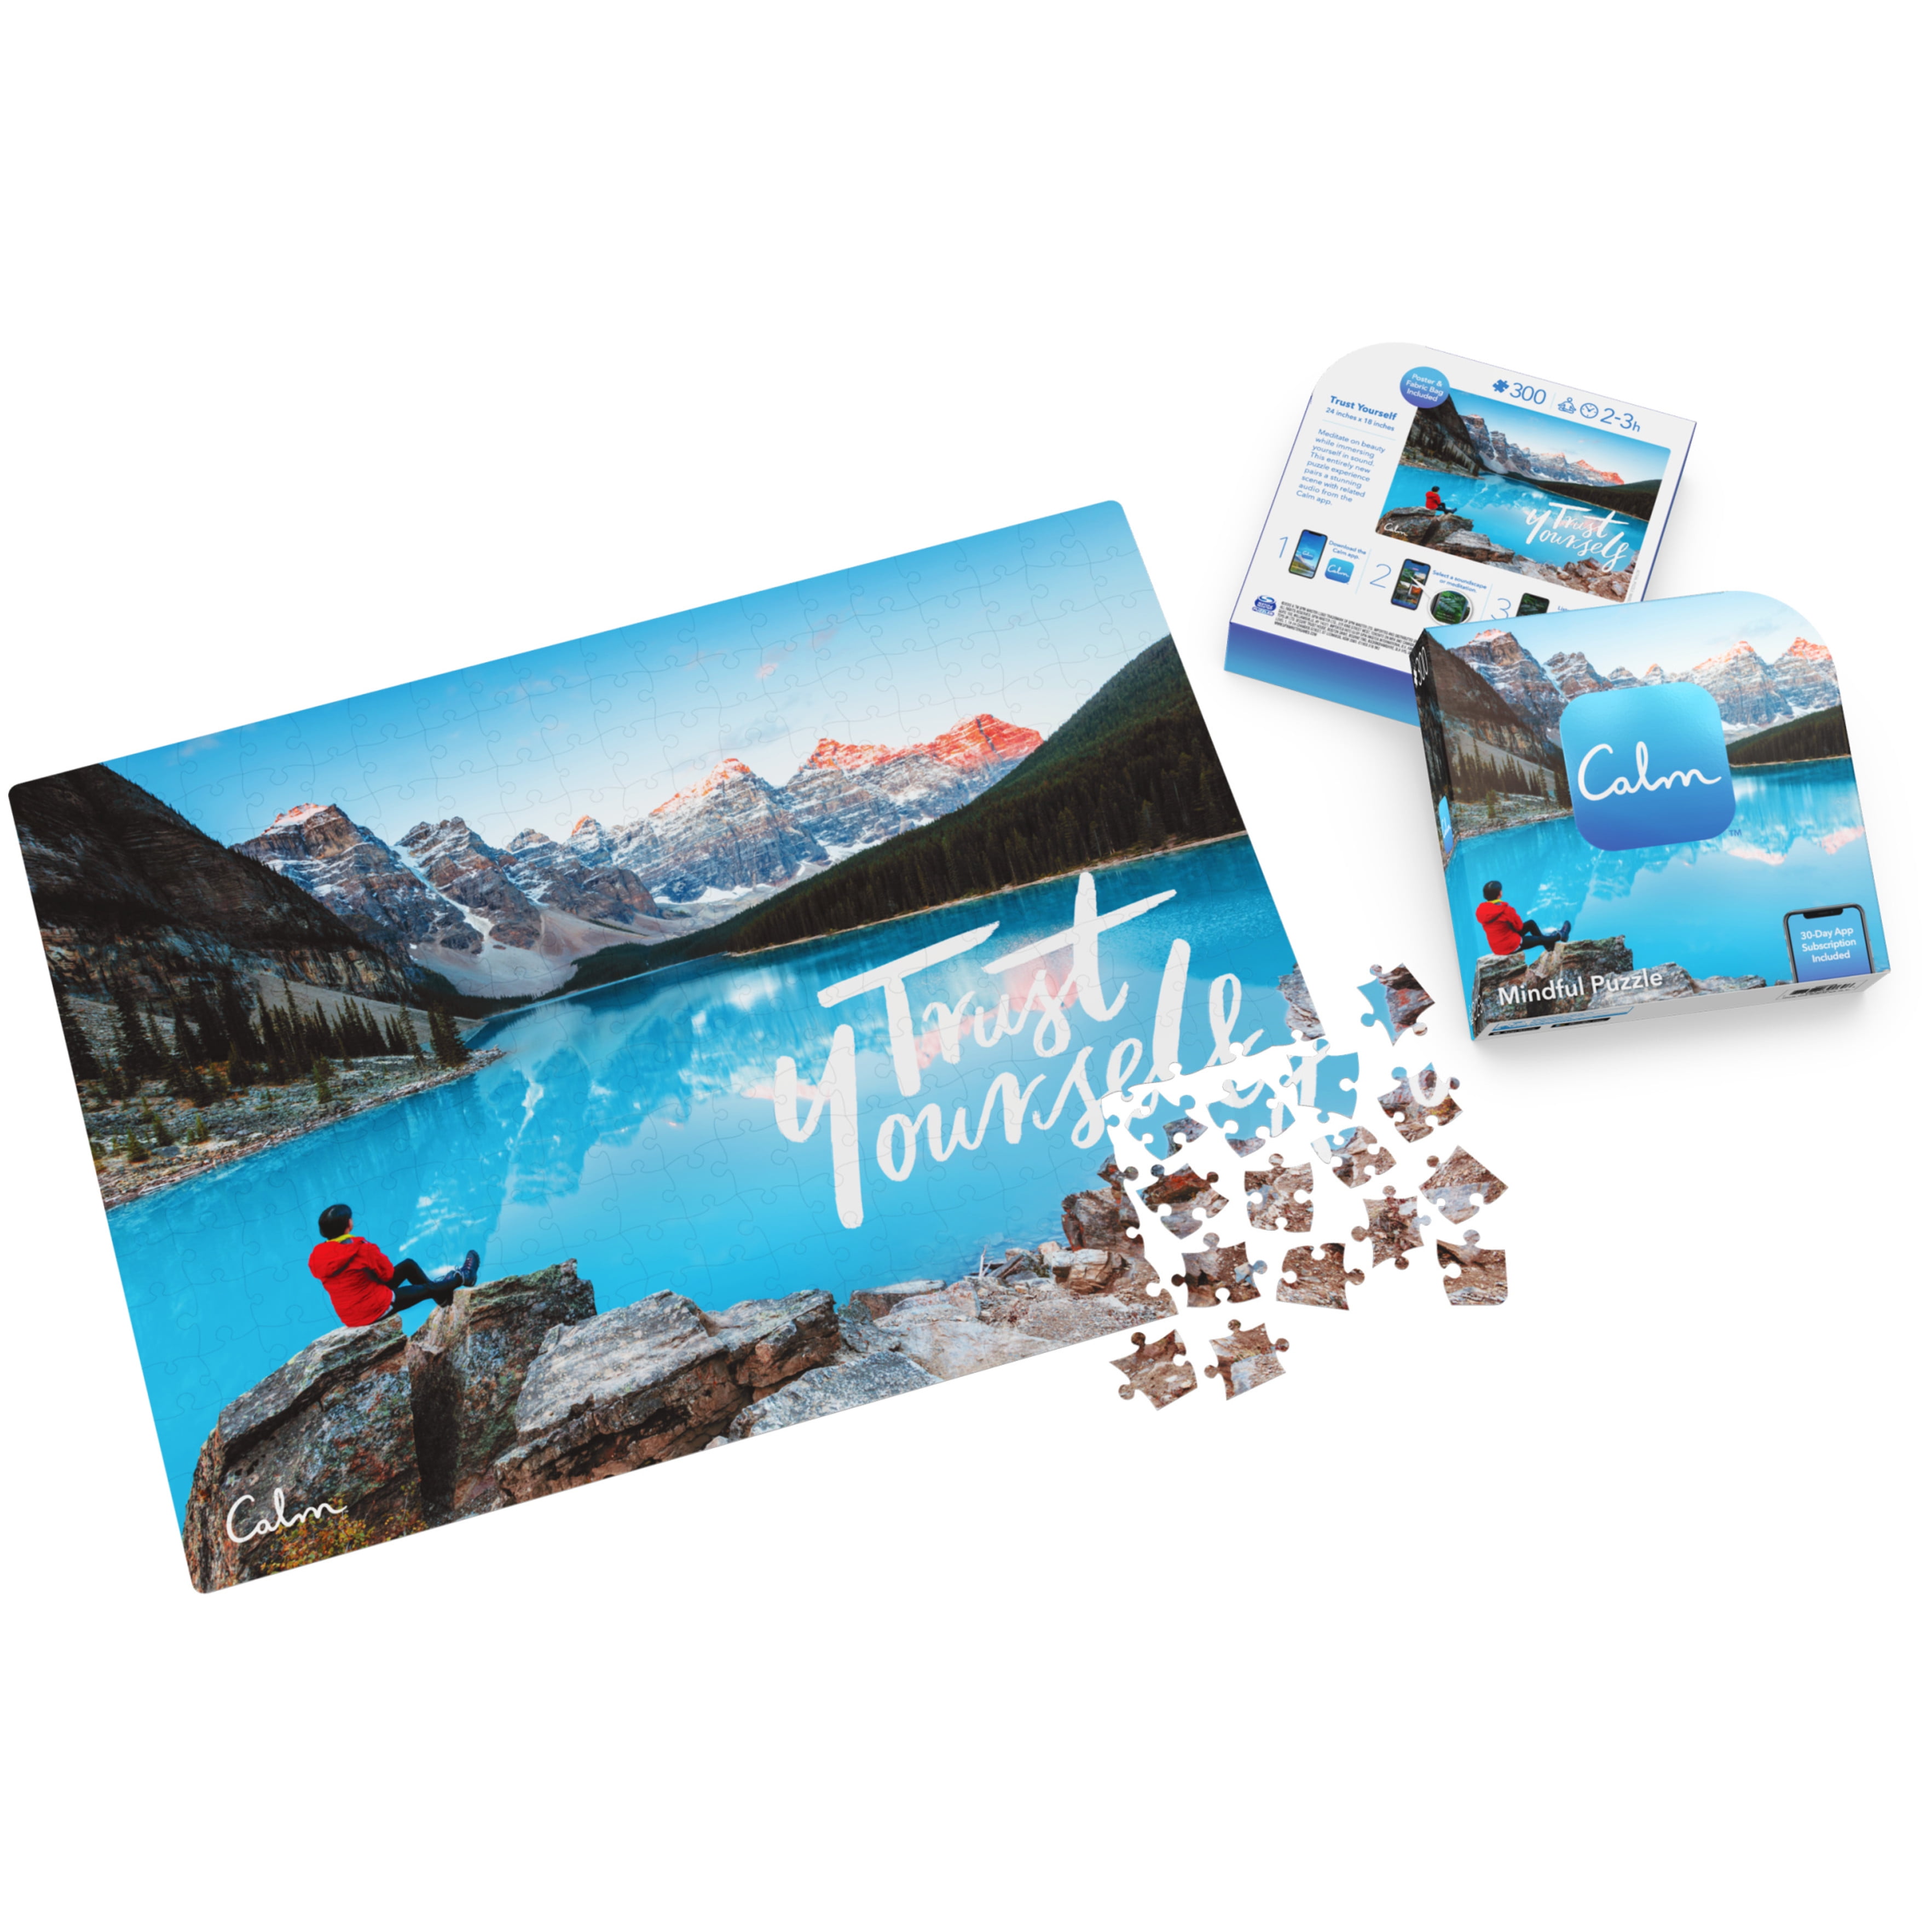 300-Piece Calm Jigsaw Puzzle and Storage Bag, Trust Yourself